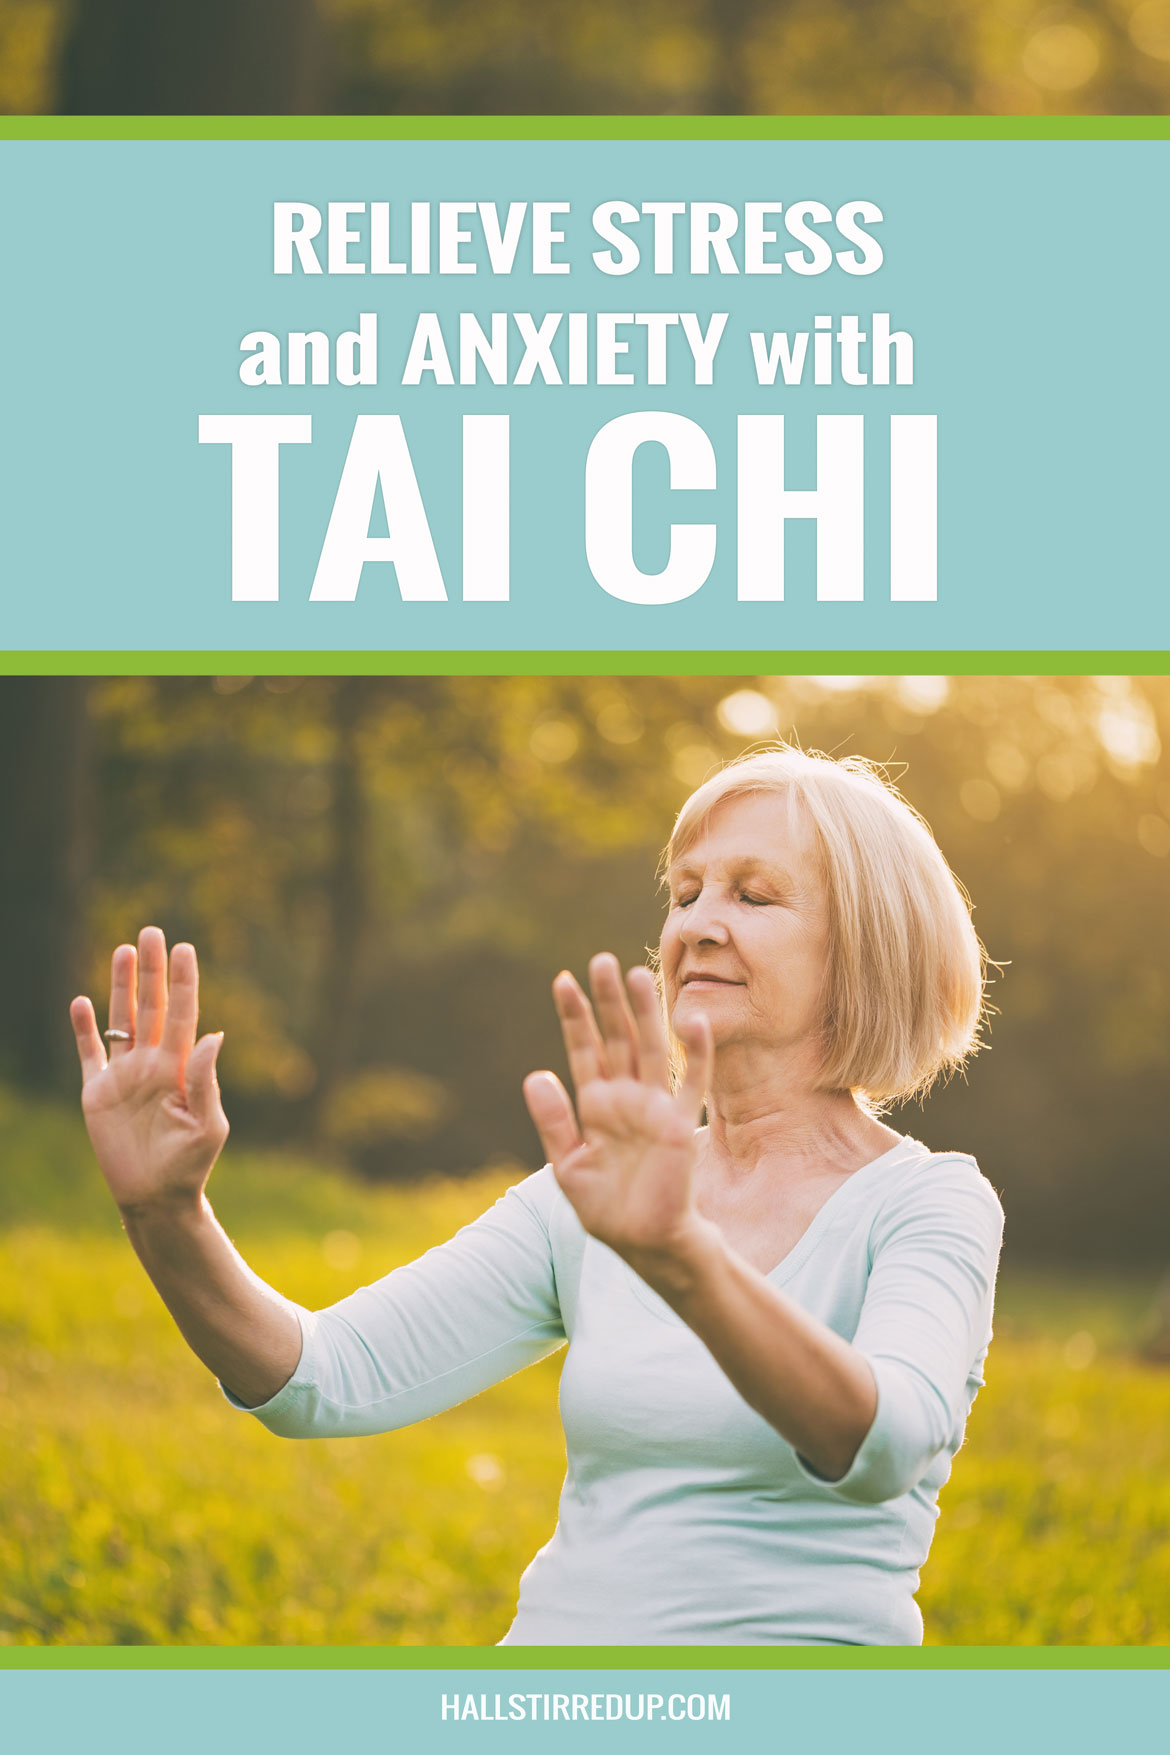 Relieve stress and anxiety with Tai Chi